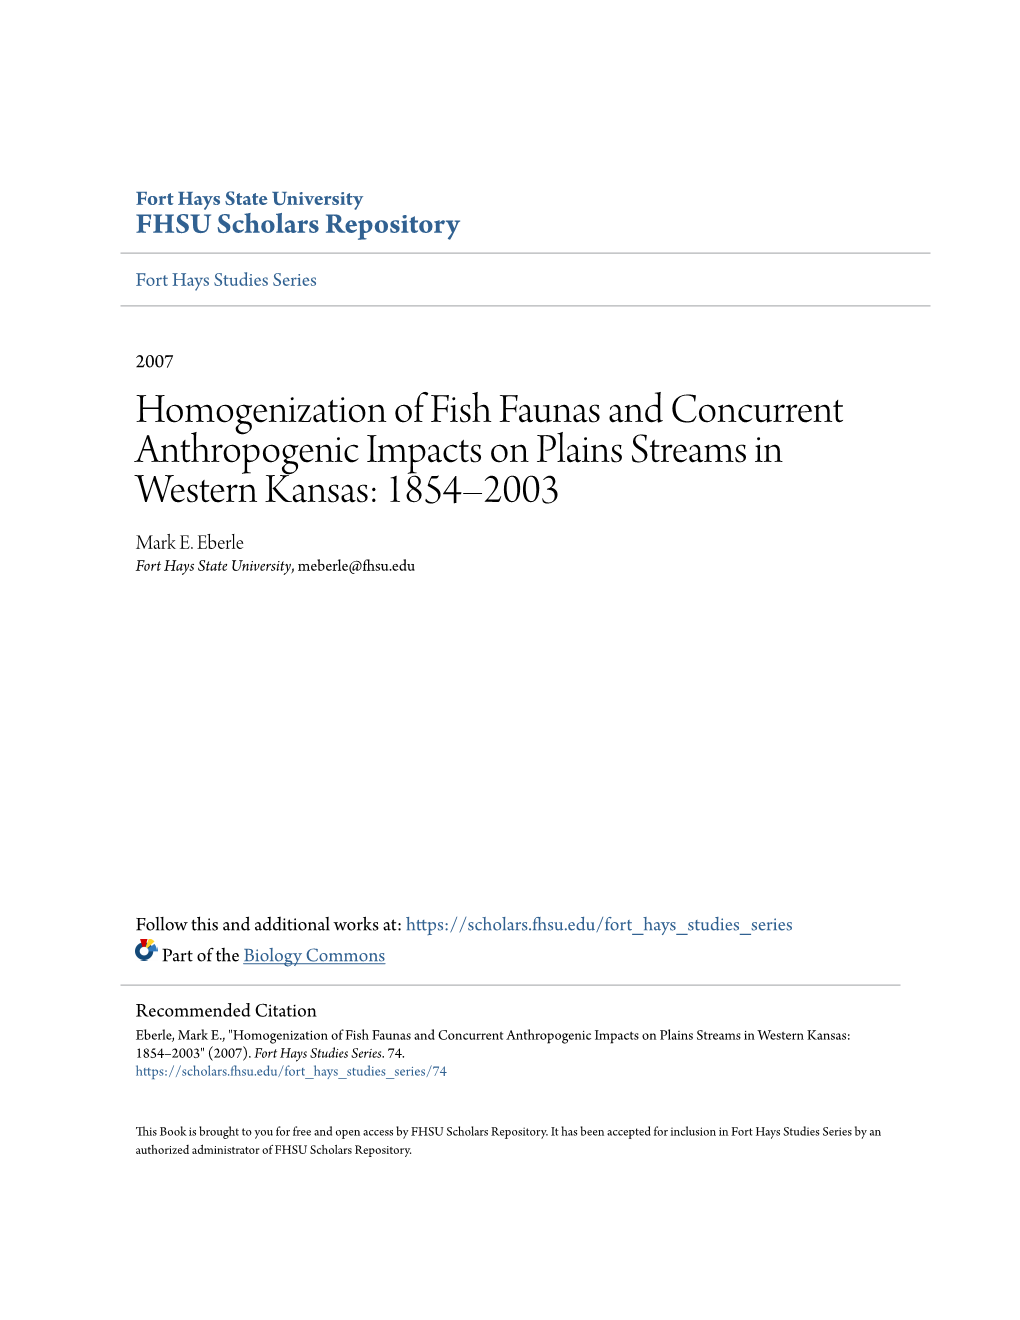 Homogenization of Fish Faunas and Concurrent Anthropogenic Impacts on Plains Streams in Western Kansas: 1854–2003 Mark E